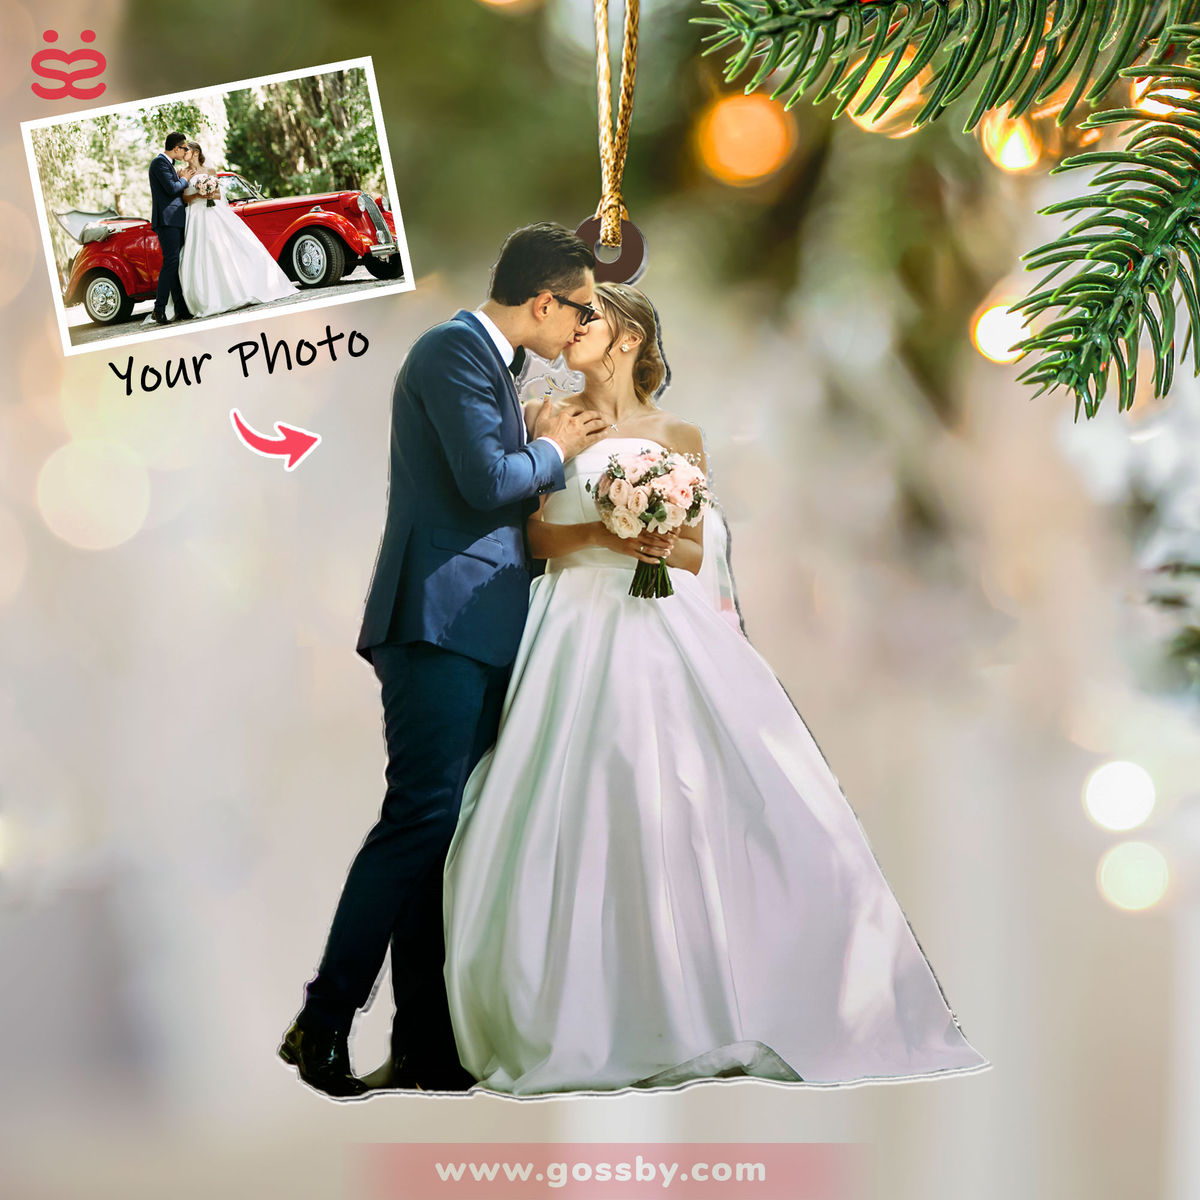 Photo Background Removal - Customized Your Photo Ornaments - Wedding Gift - Gift for Couple - Couple Photo Gifts, Christmas Gifts for Couple_3